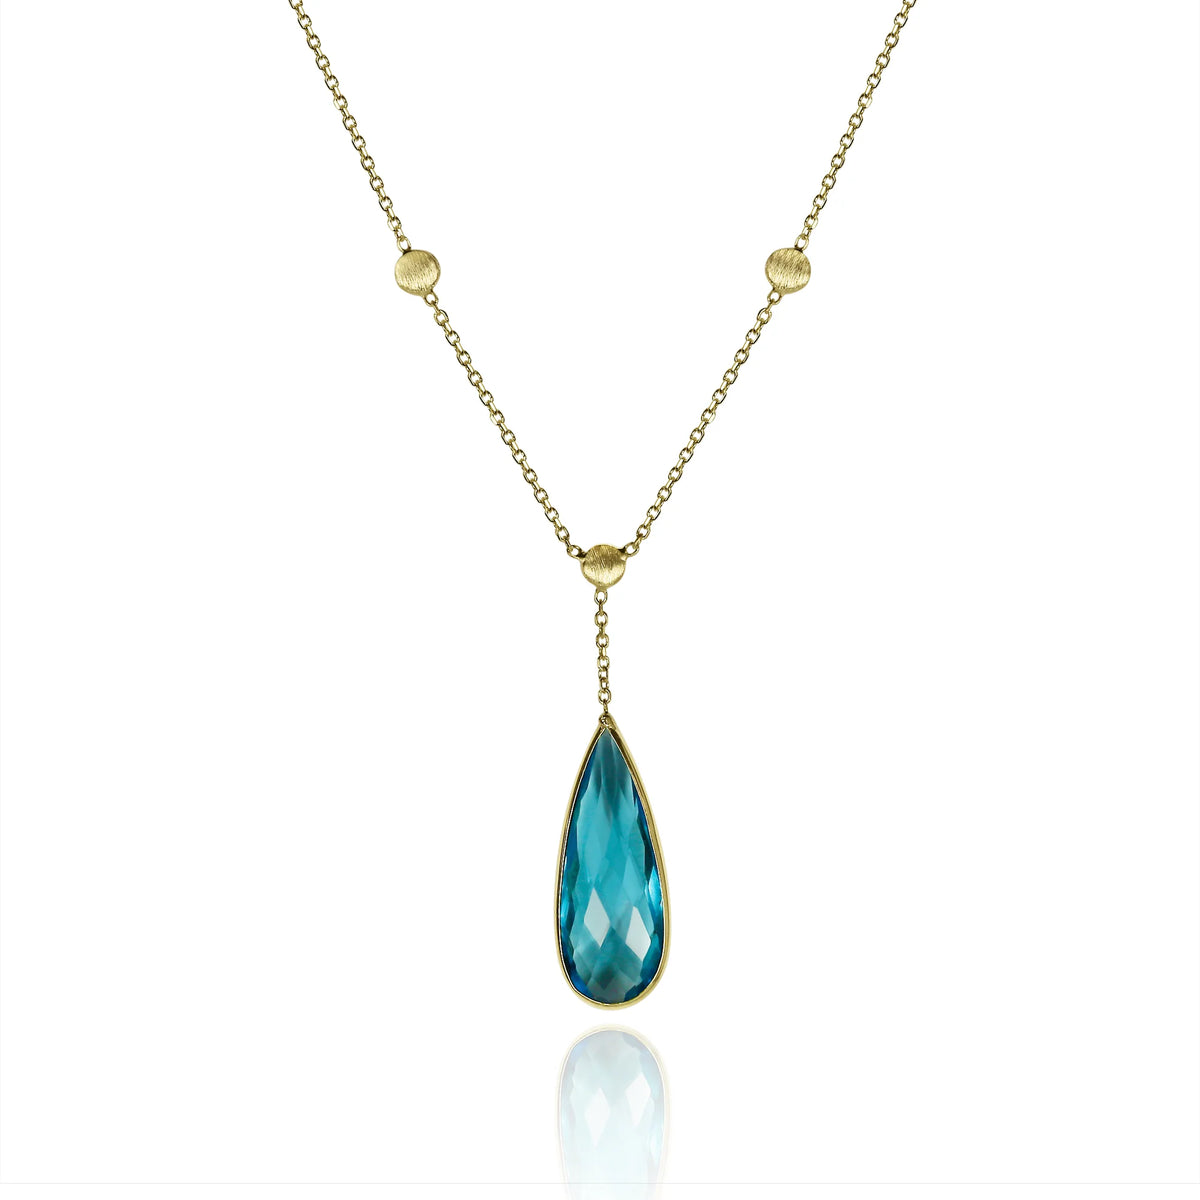 Blue Topaz Necklace with Textured Gold Stations